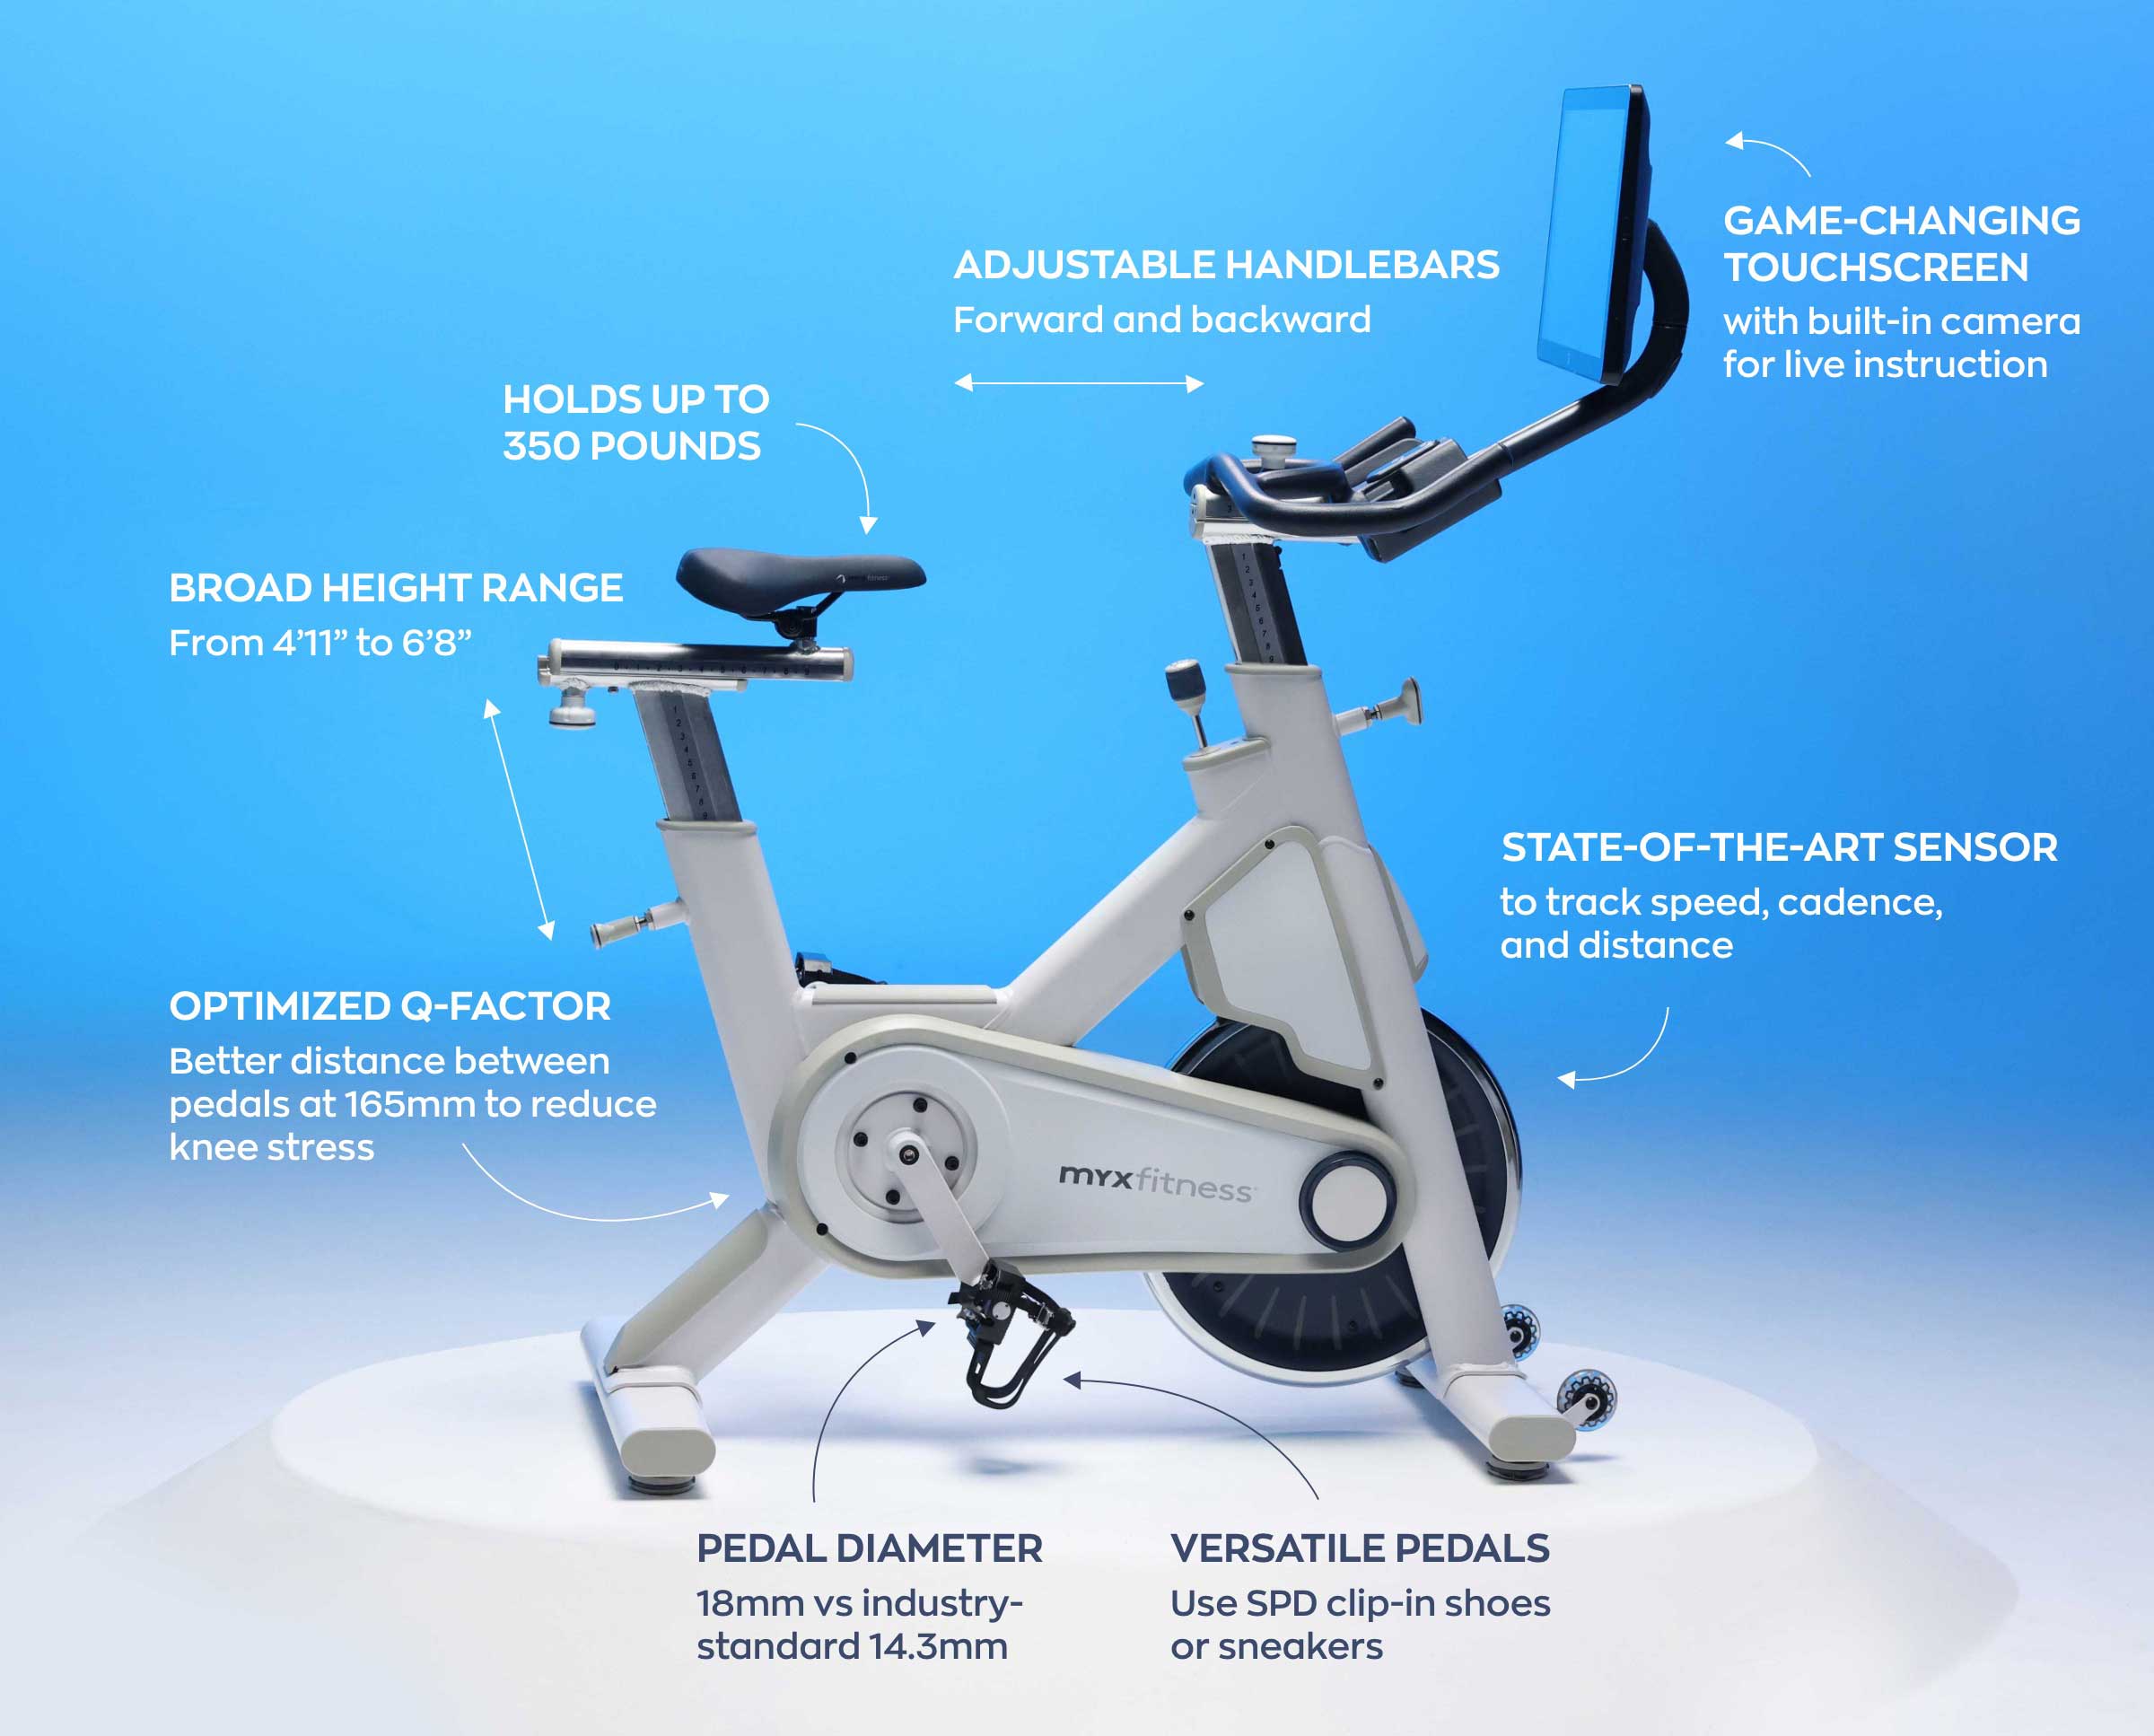 The all new MYX II complete with Game-changing touchscreen with built-in camera for live instruction, State-of-the-art sensor to track speed, cadence, and distance, adjustable handlebars and seat, optimized for q-factor and versatile pedals